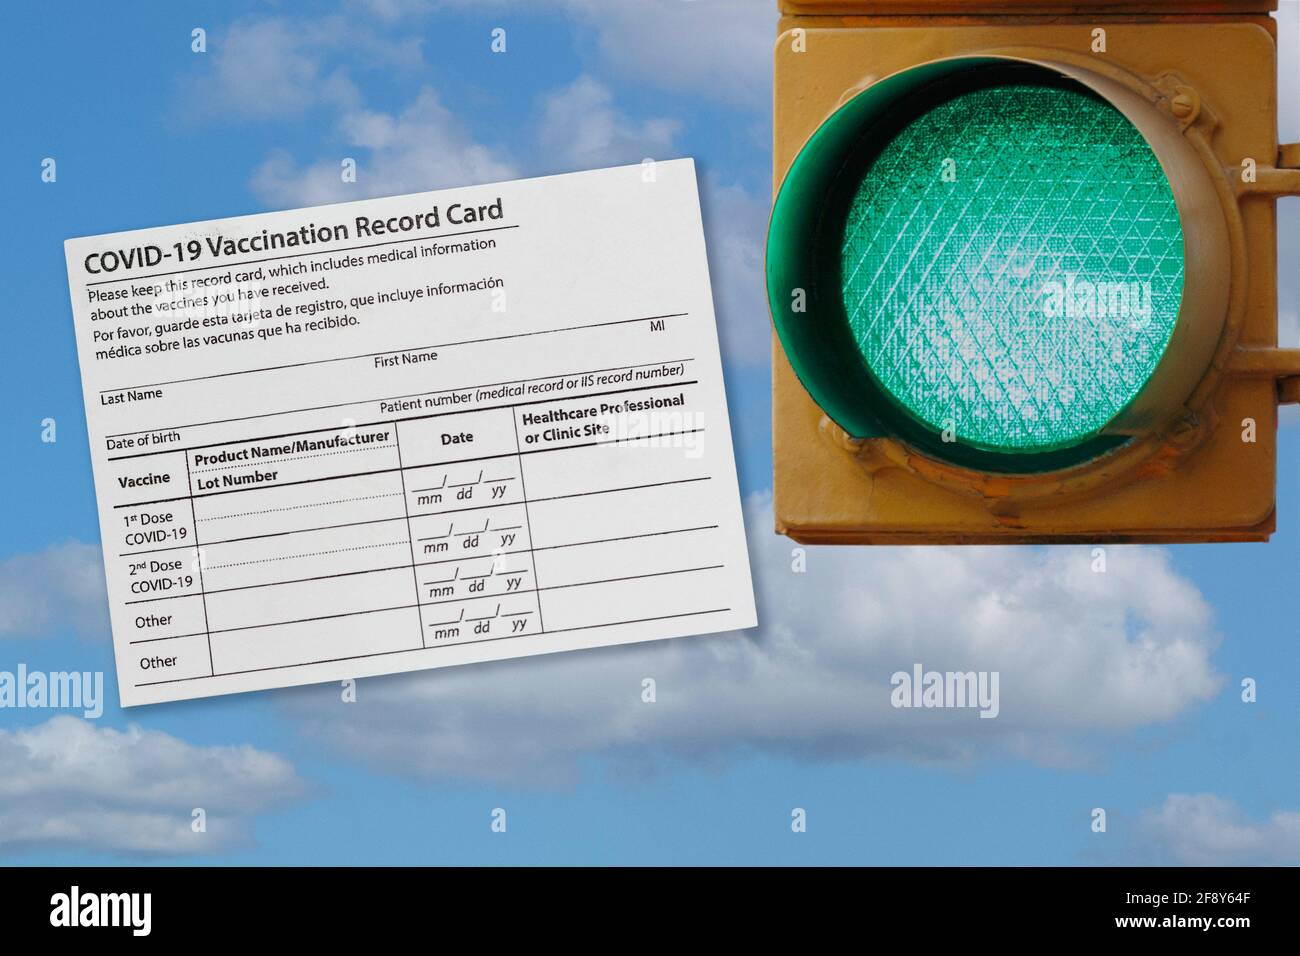 photo collage of covid-19 vaccination record card and a green traffic light against a sky, representing opening as more people are vaccinated Stock Photo